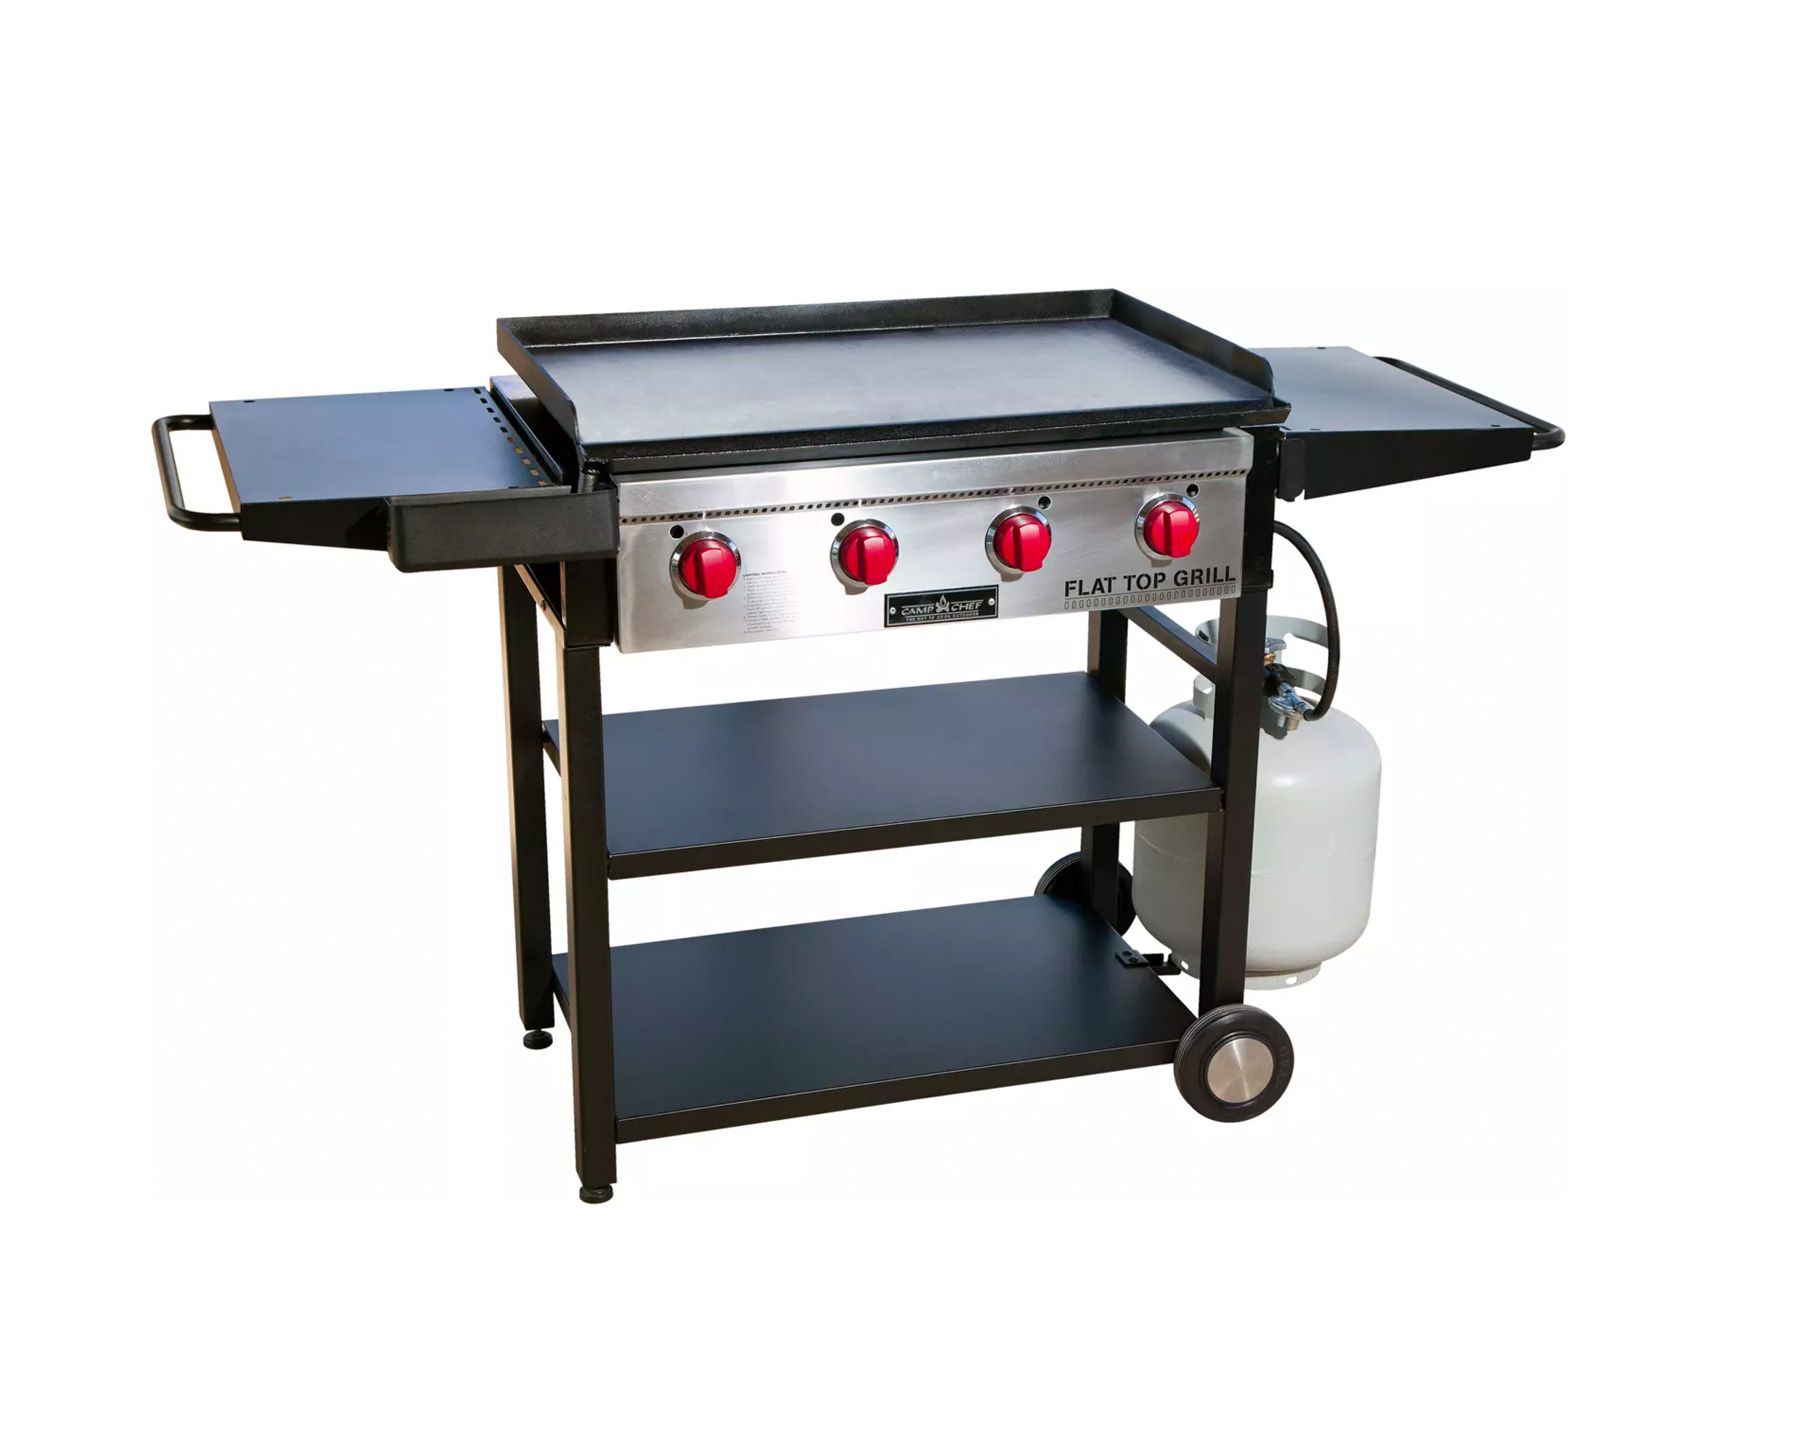 The 10 Best Flat Top Grills 2021, Outdoor Gas Flat Top Grill